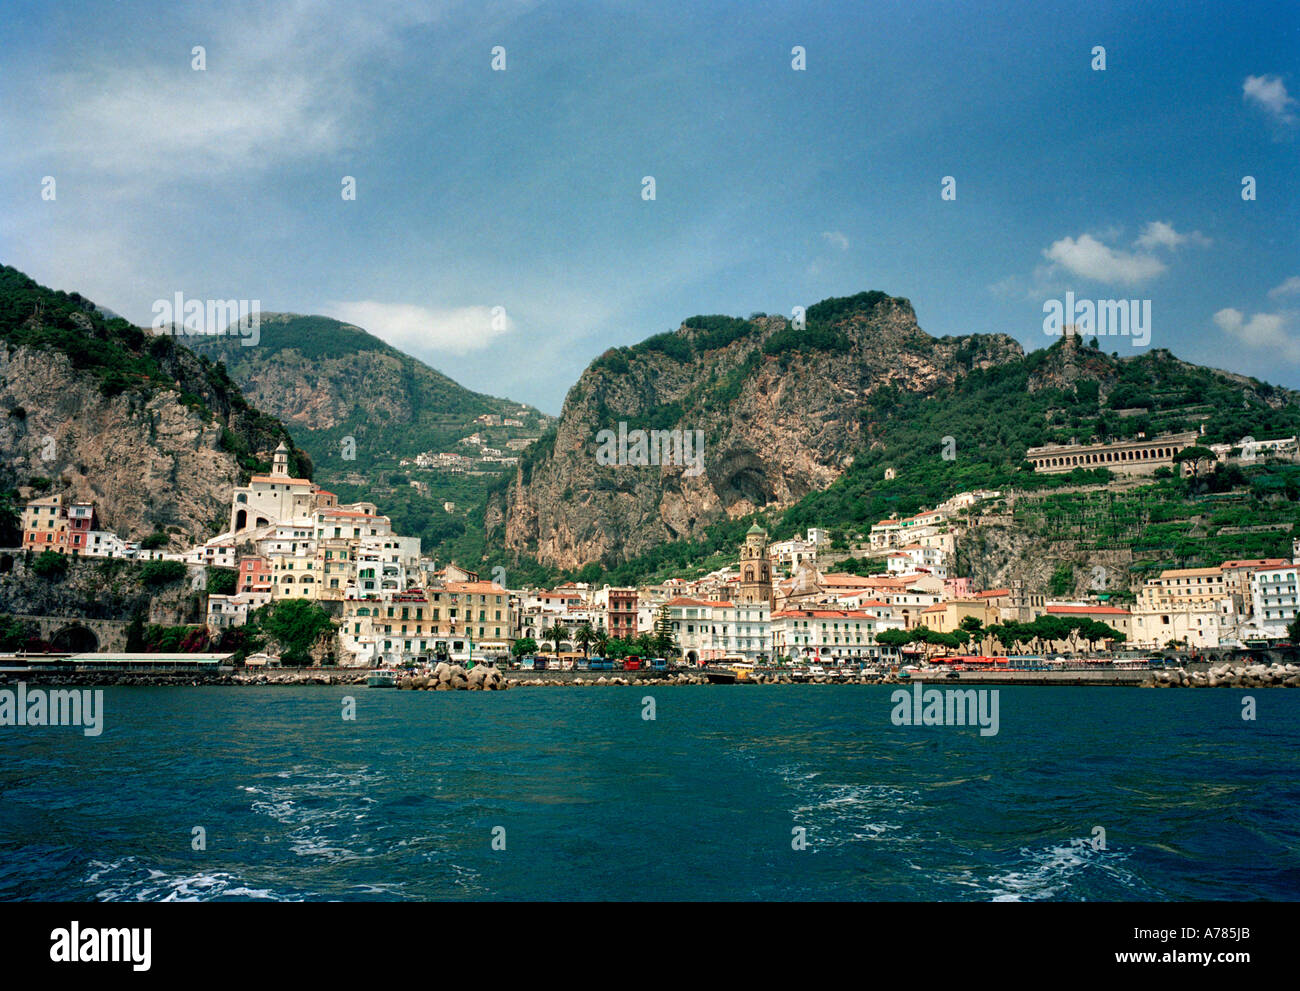 The medieval city republic of Amalfi seen from the sea Stock Photo